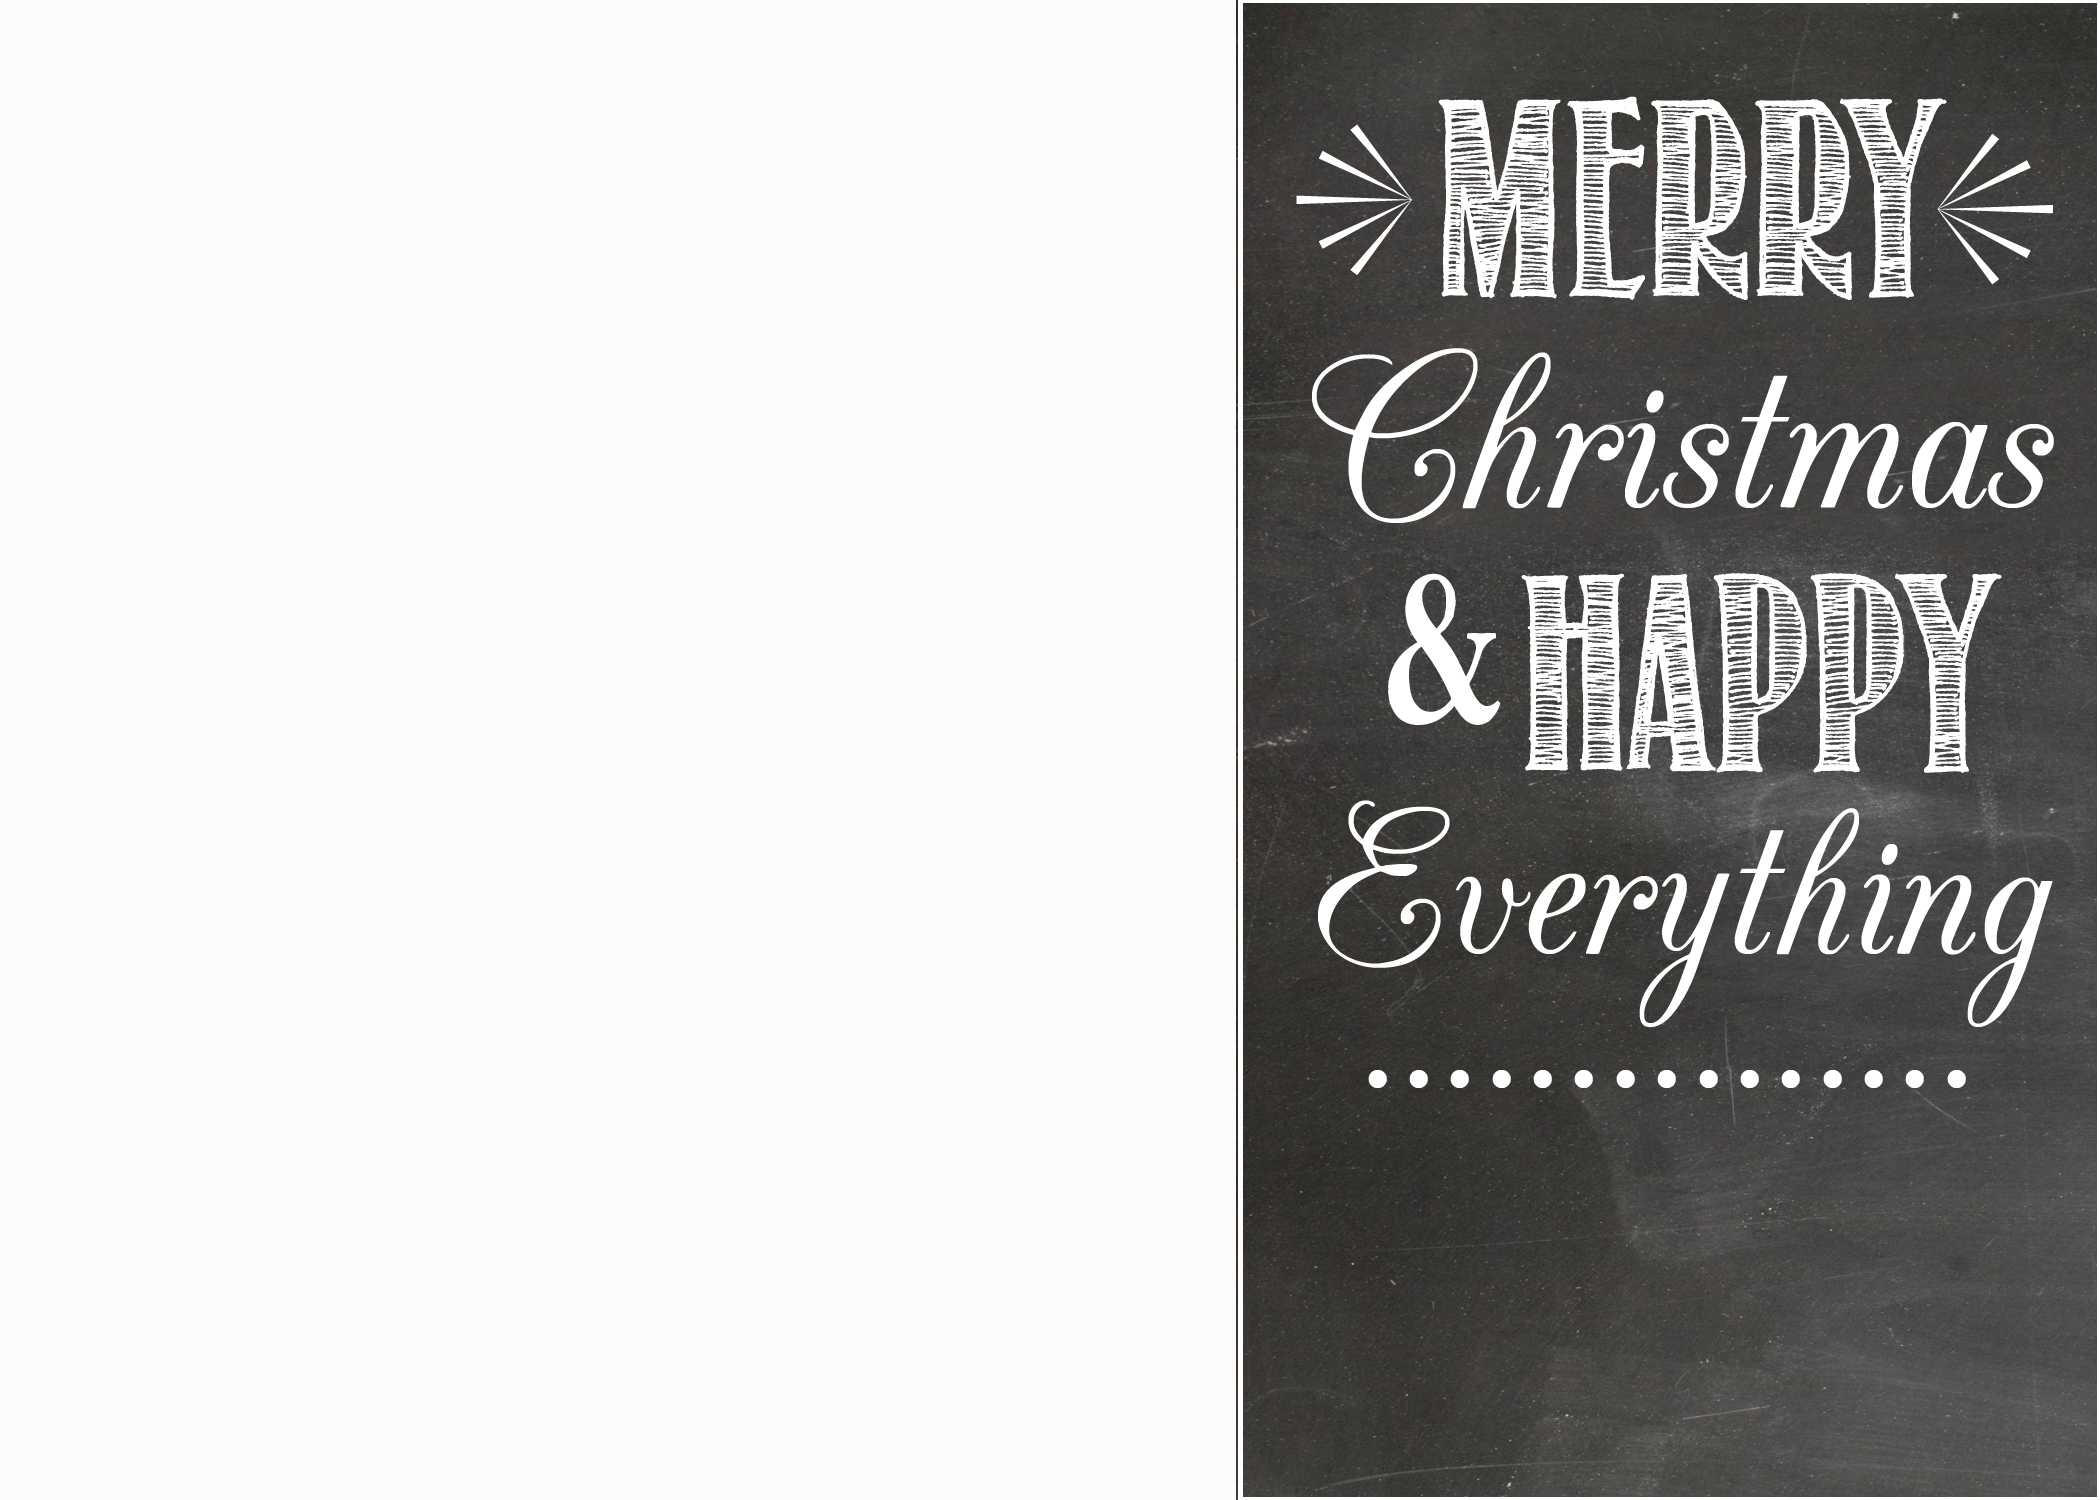 Free Chalkboard Christmas Card Templates | Oldsaltfarm Intended For Free Holiday Photo Card Templates